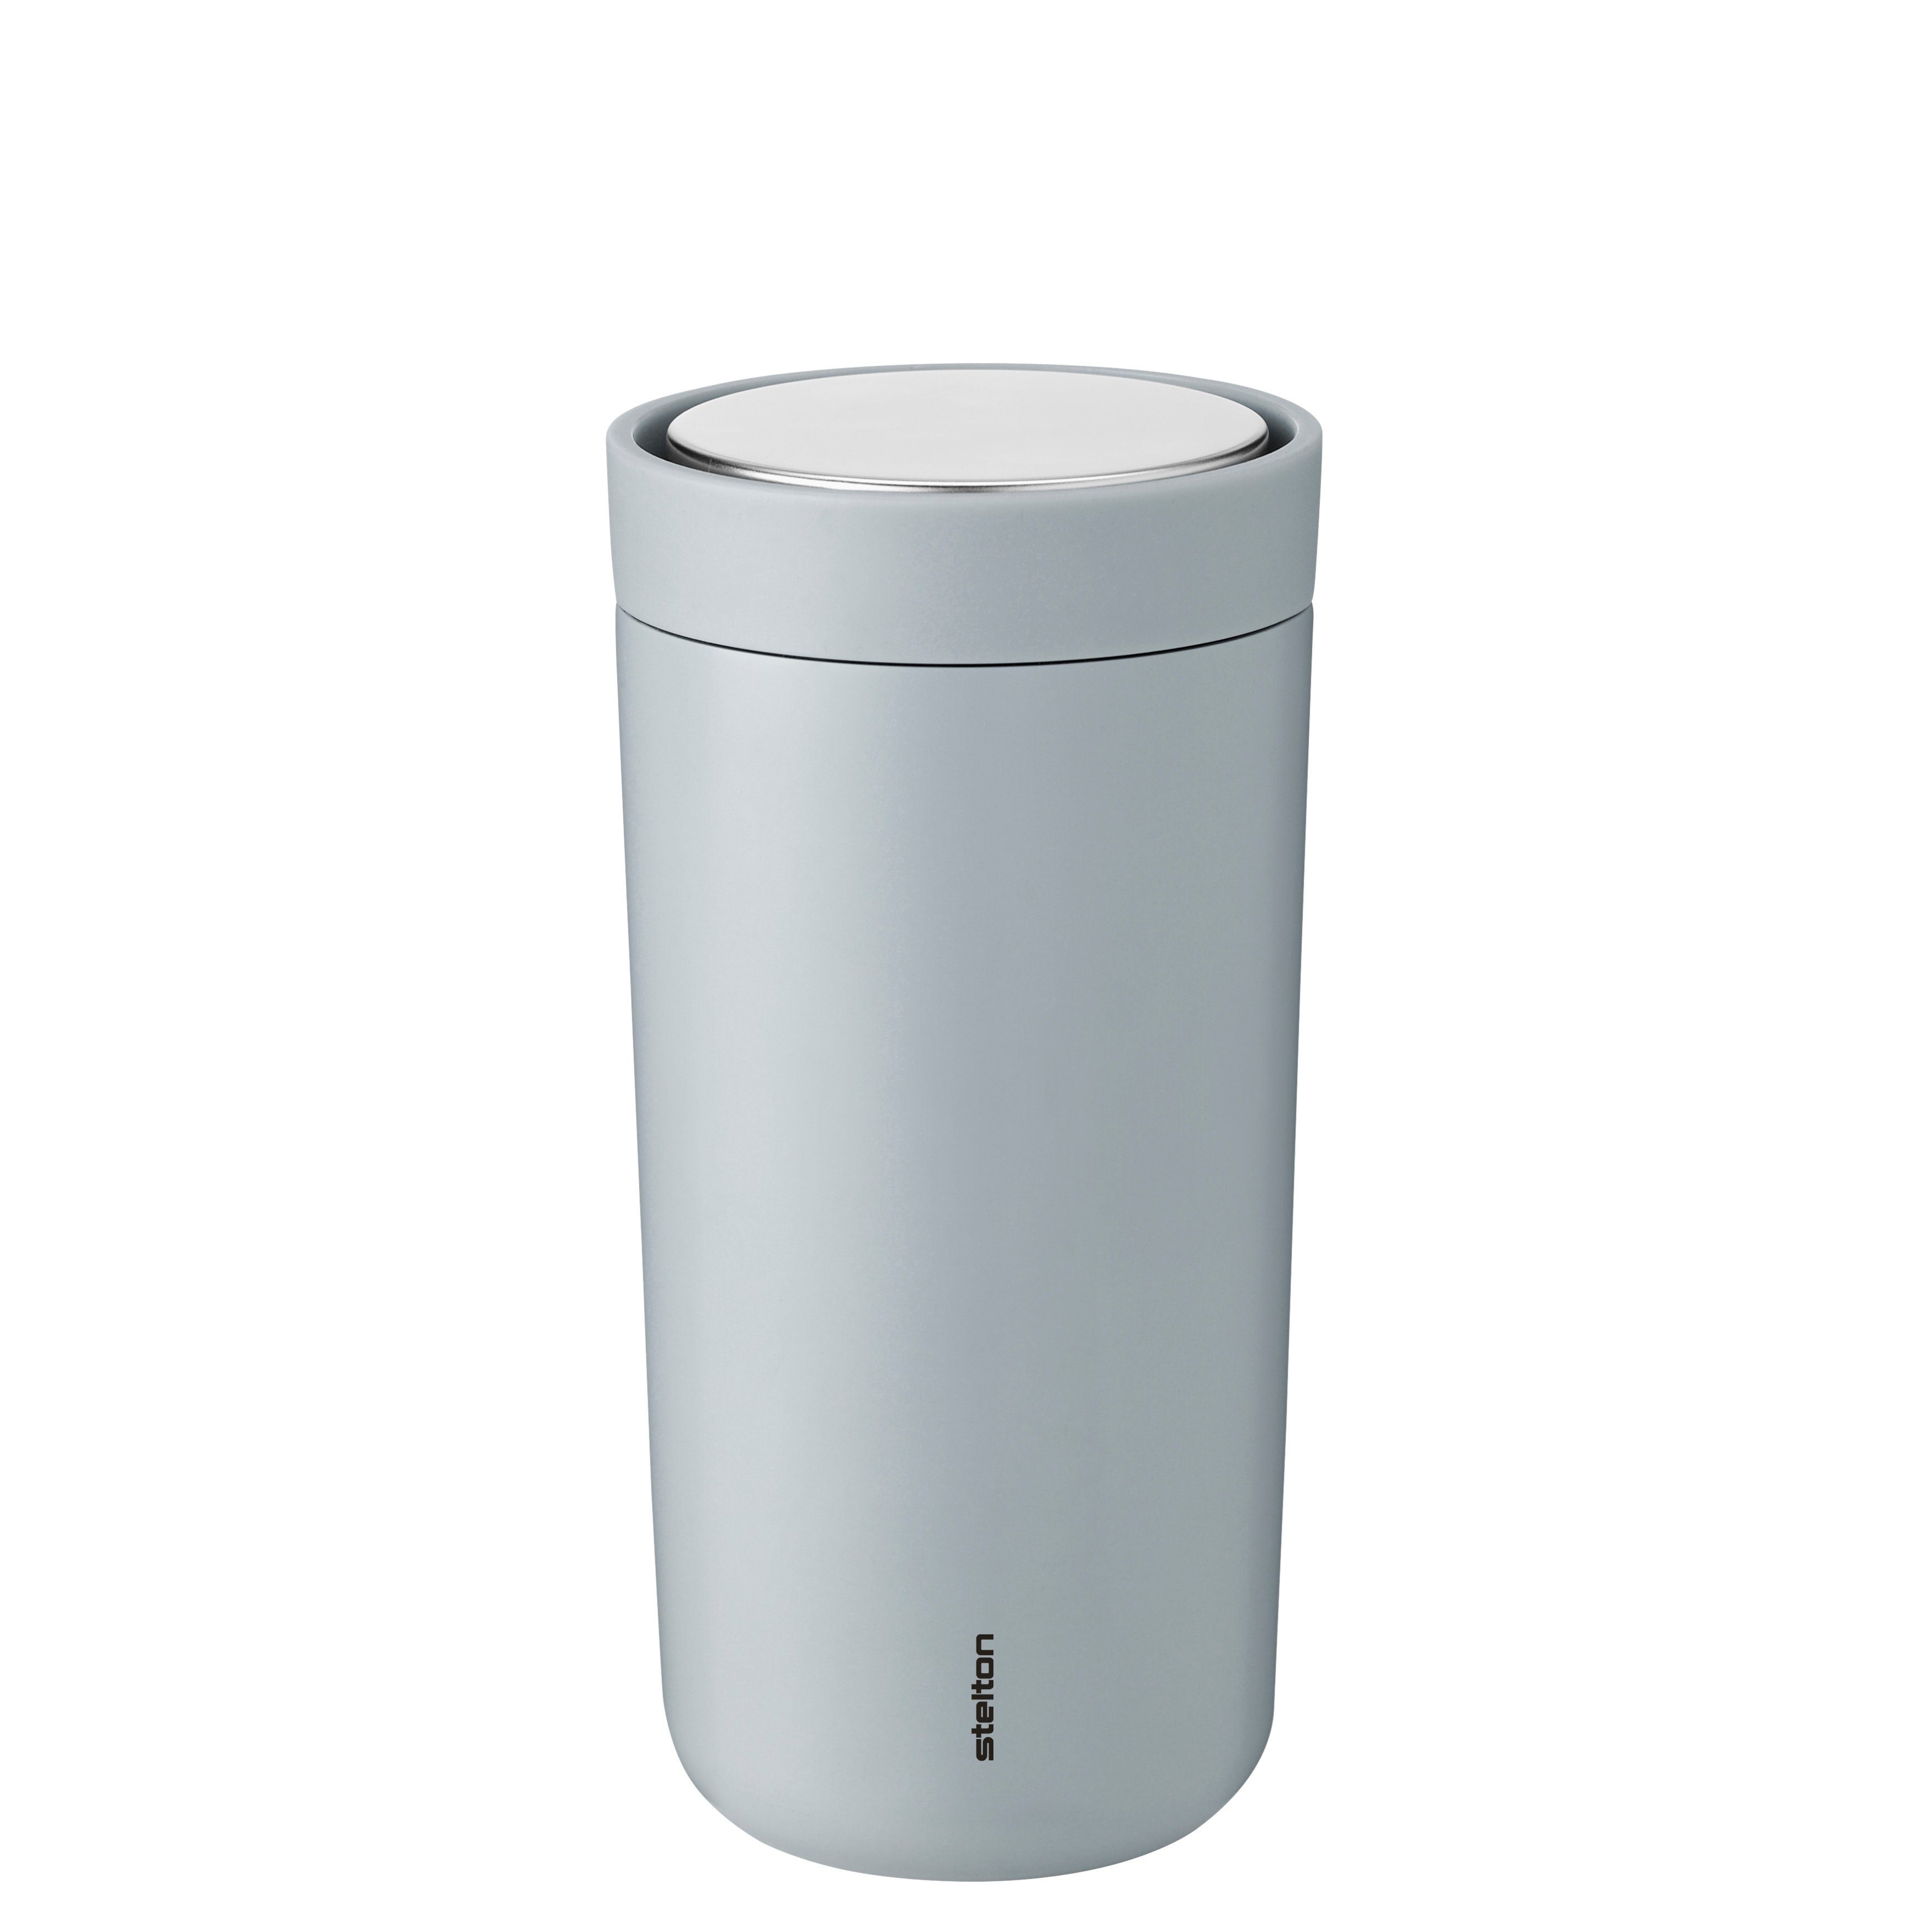 Click Stelton To Soft Stelton Edelstahl Go Thermobecher, Thermobecher cloud